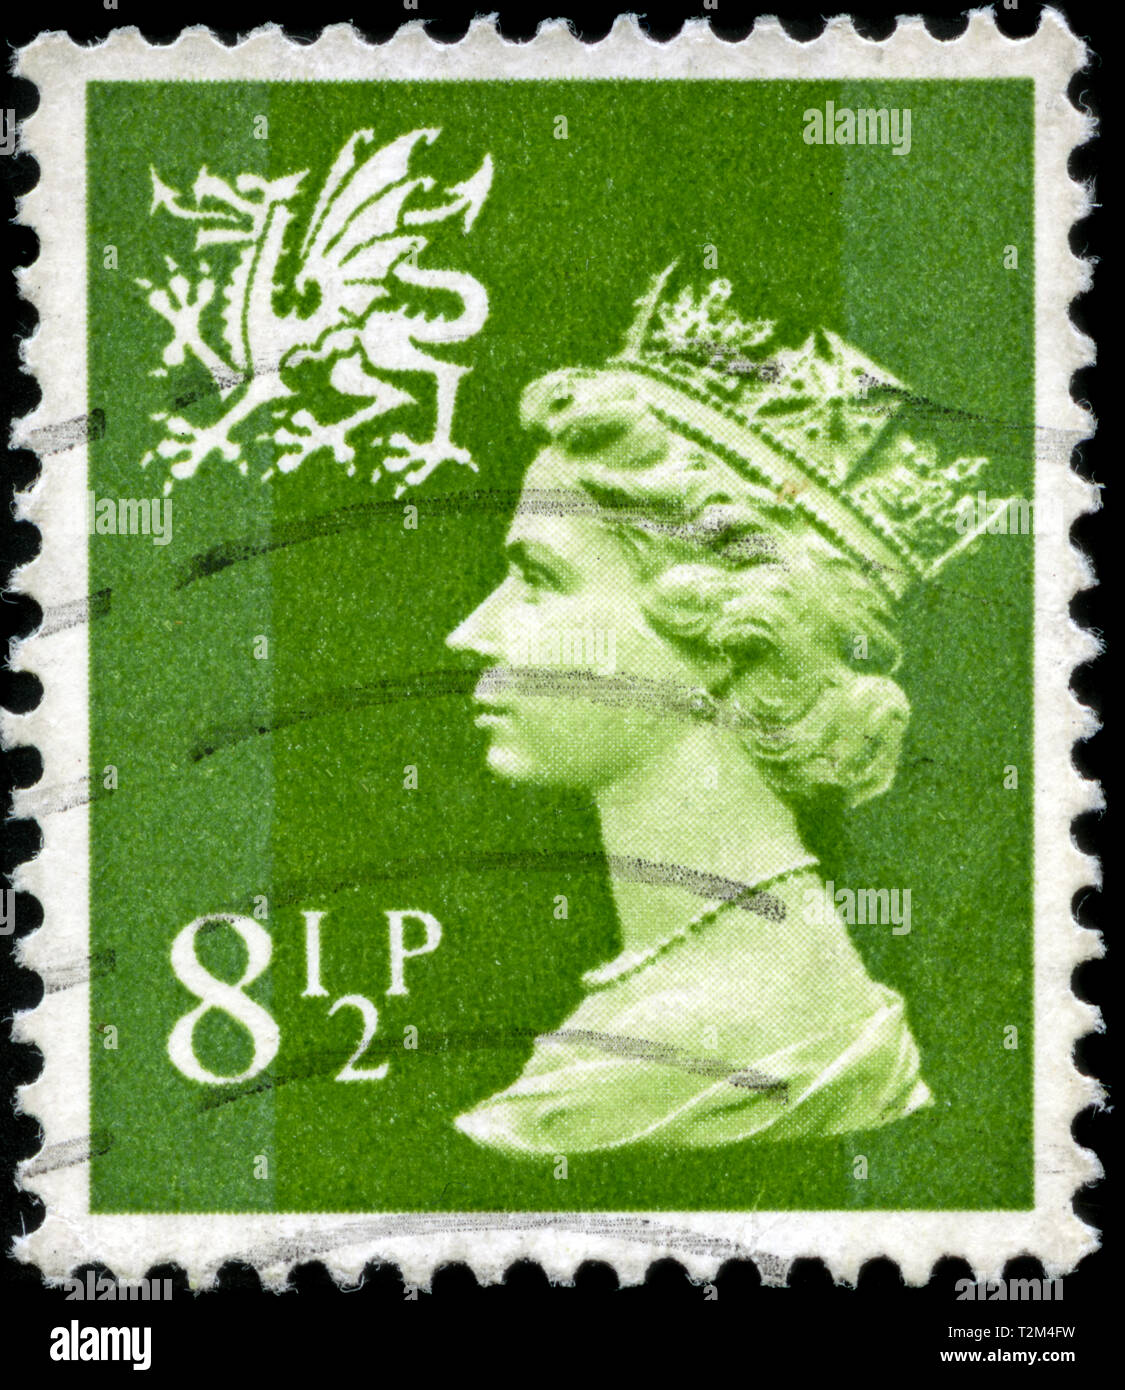 Postage stamp from the United Kingdom and Northern Ireland in the Regional - Wales series issued in 1976 Stock Photo